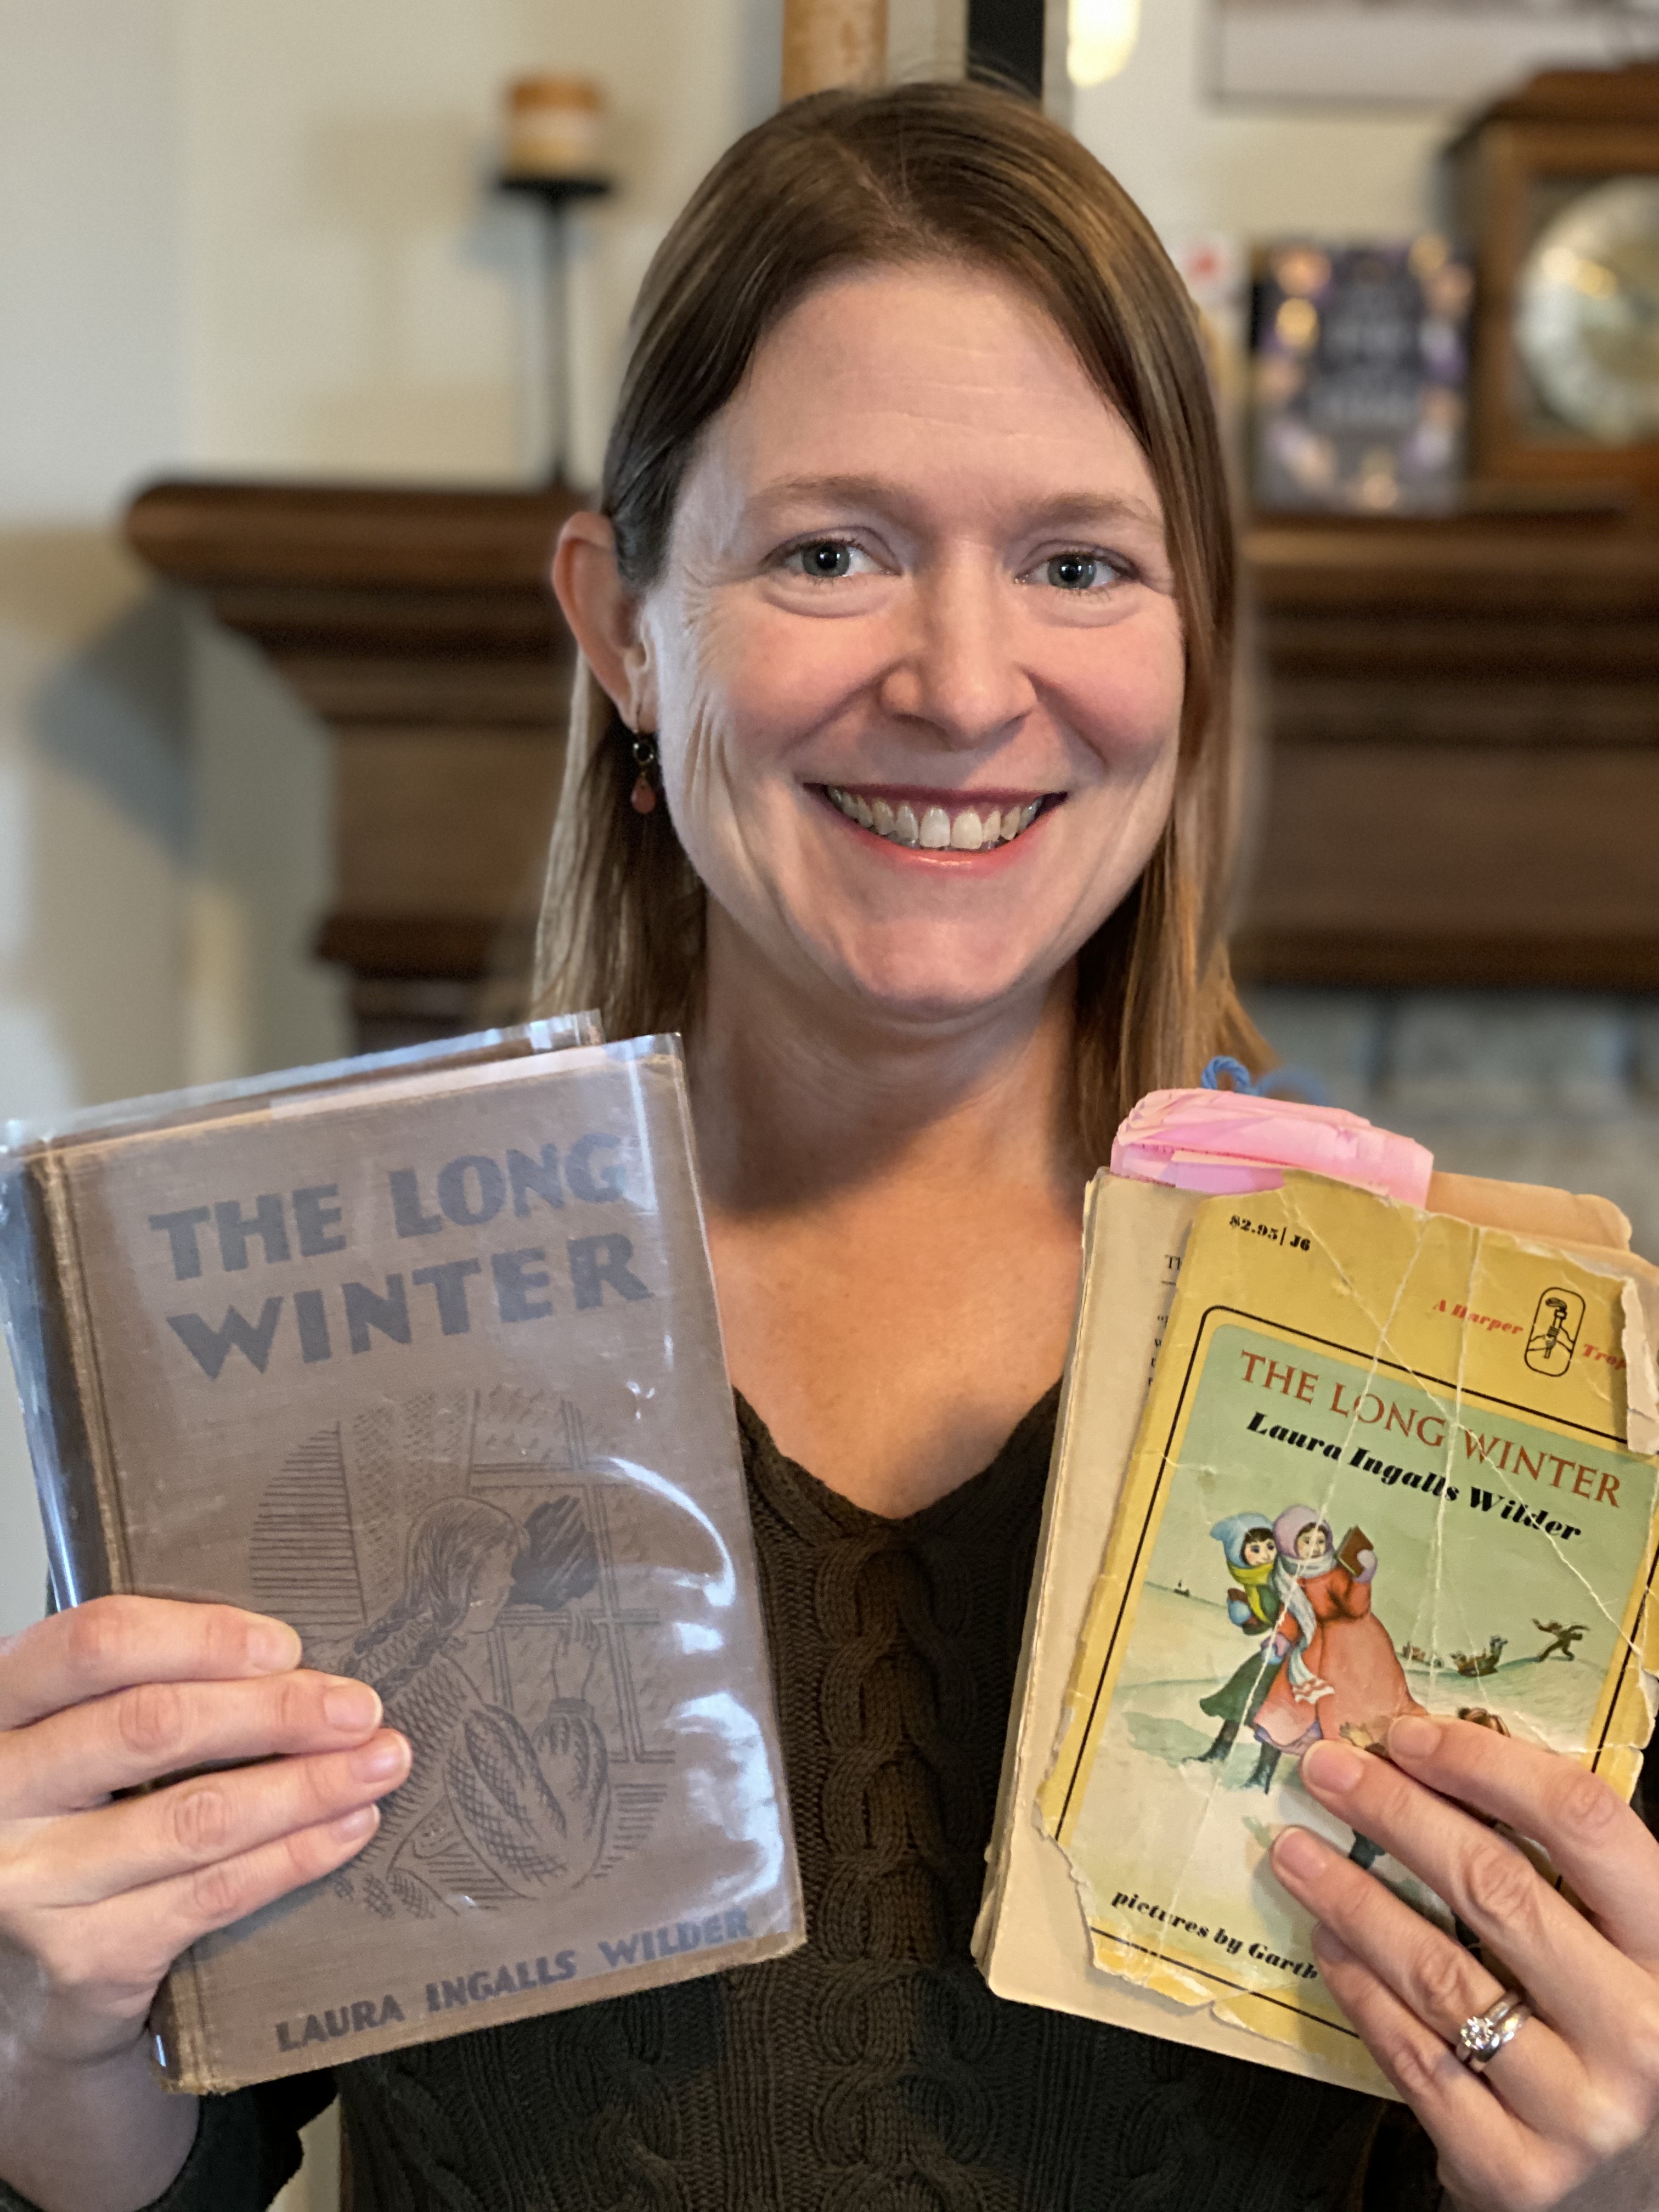 Barb Mayes Boustead and her original and 'working' copies of Laura Ingalls Wilder's The Long Winter.